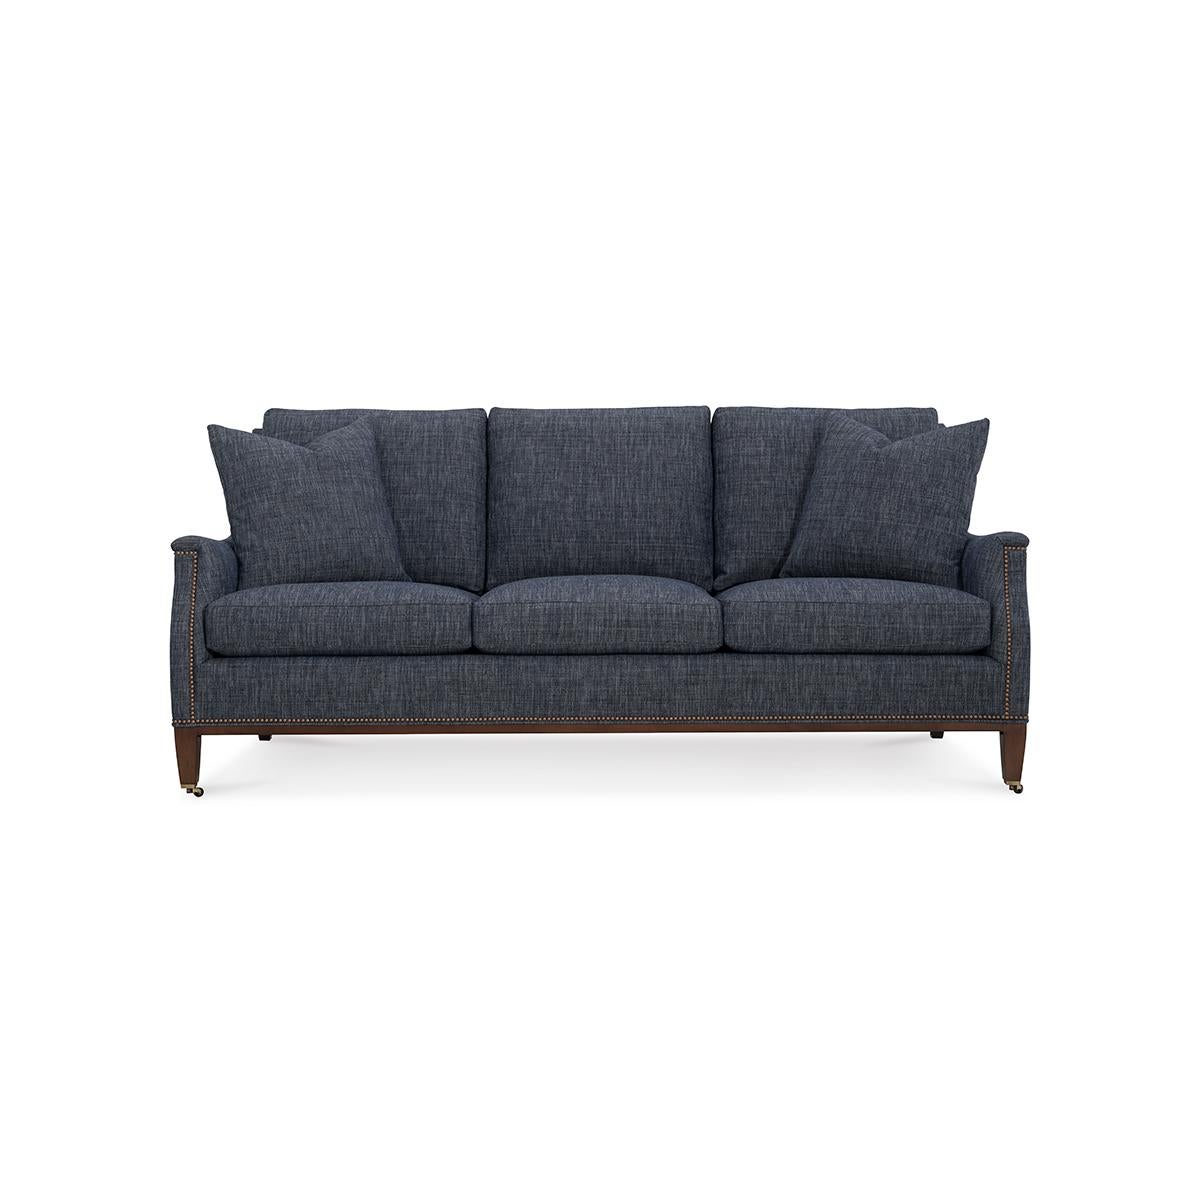 With scrolling arms, raised on square tapered legs, with nailhead trim details.

A classic design that works well with almost any decor. 

Completely Made in USA, with traditional 8-way hand-tied construction, and US grown - toxin-free - kiln-dried